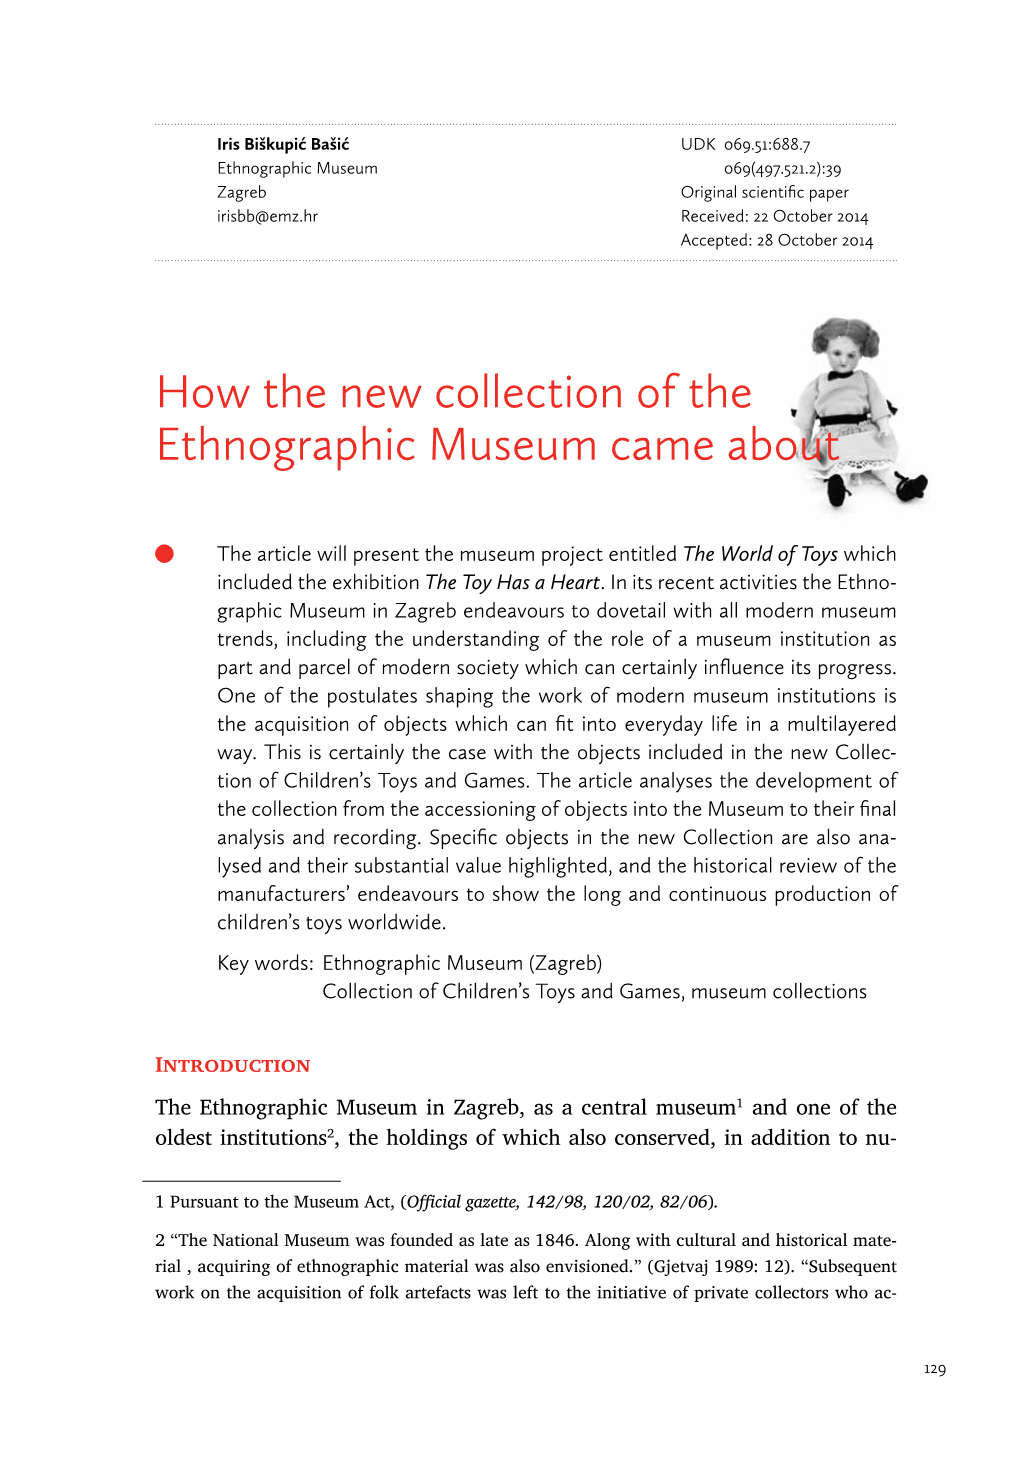 How the New Collection of the Ethnographic Museum Came About